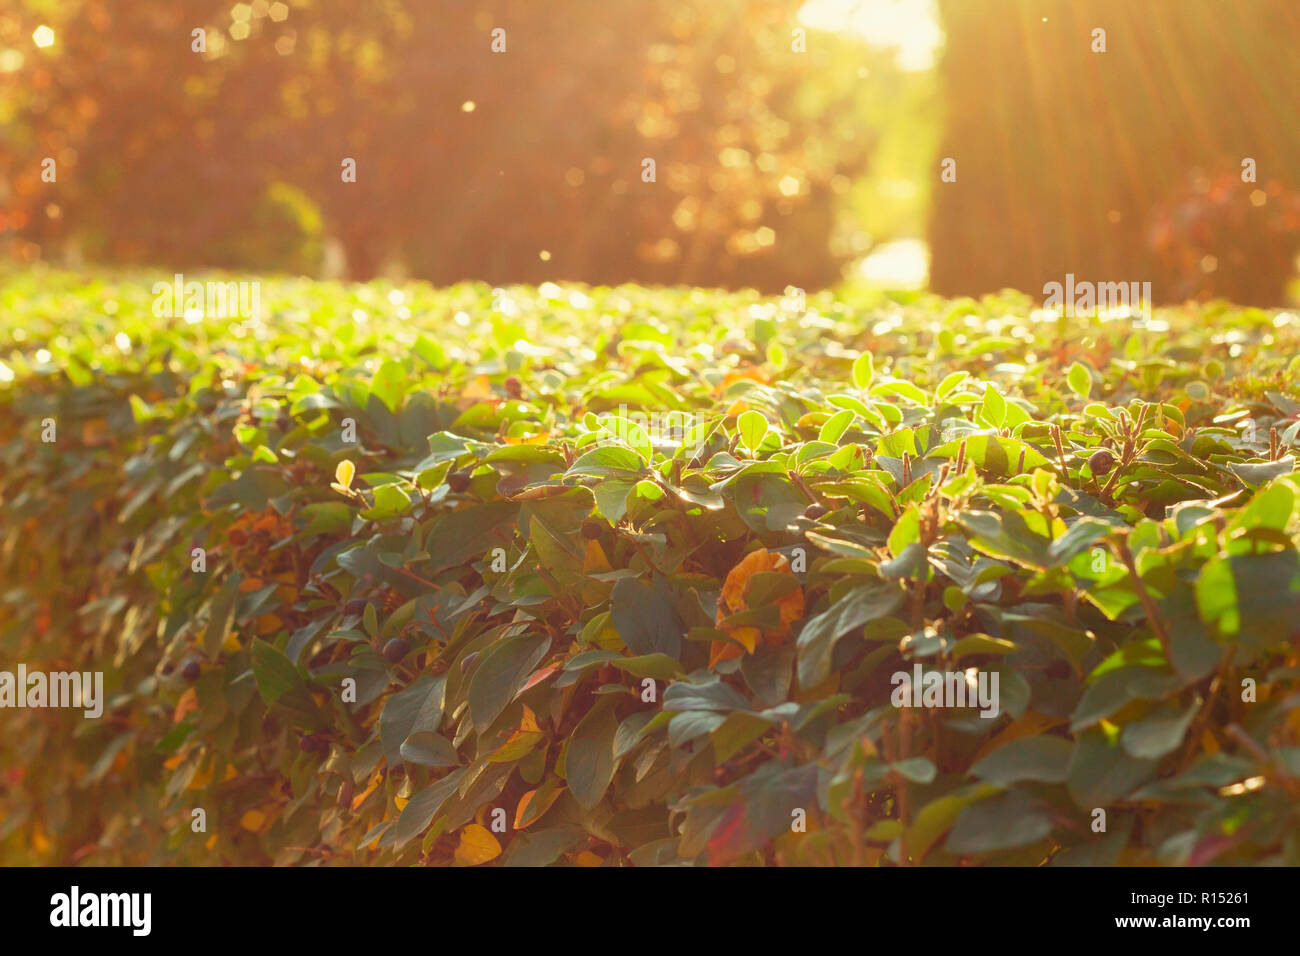 blurred autumn or summer natural background with leaves and sun light Stock Photo